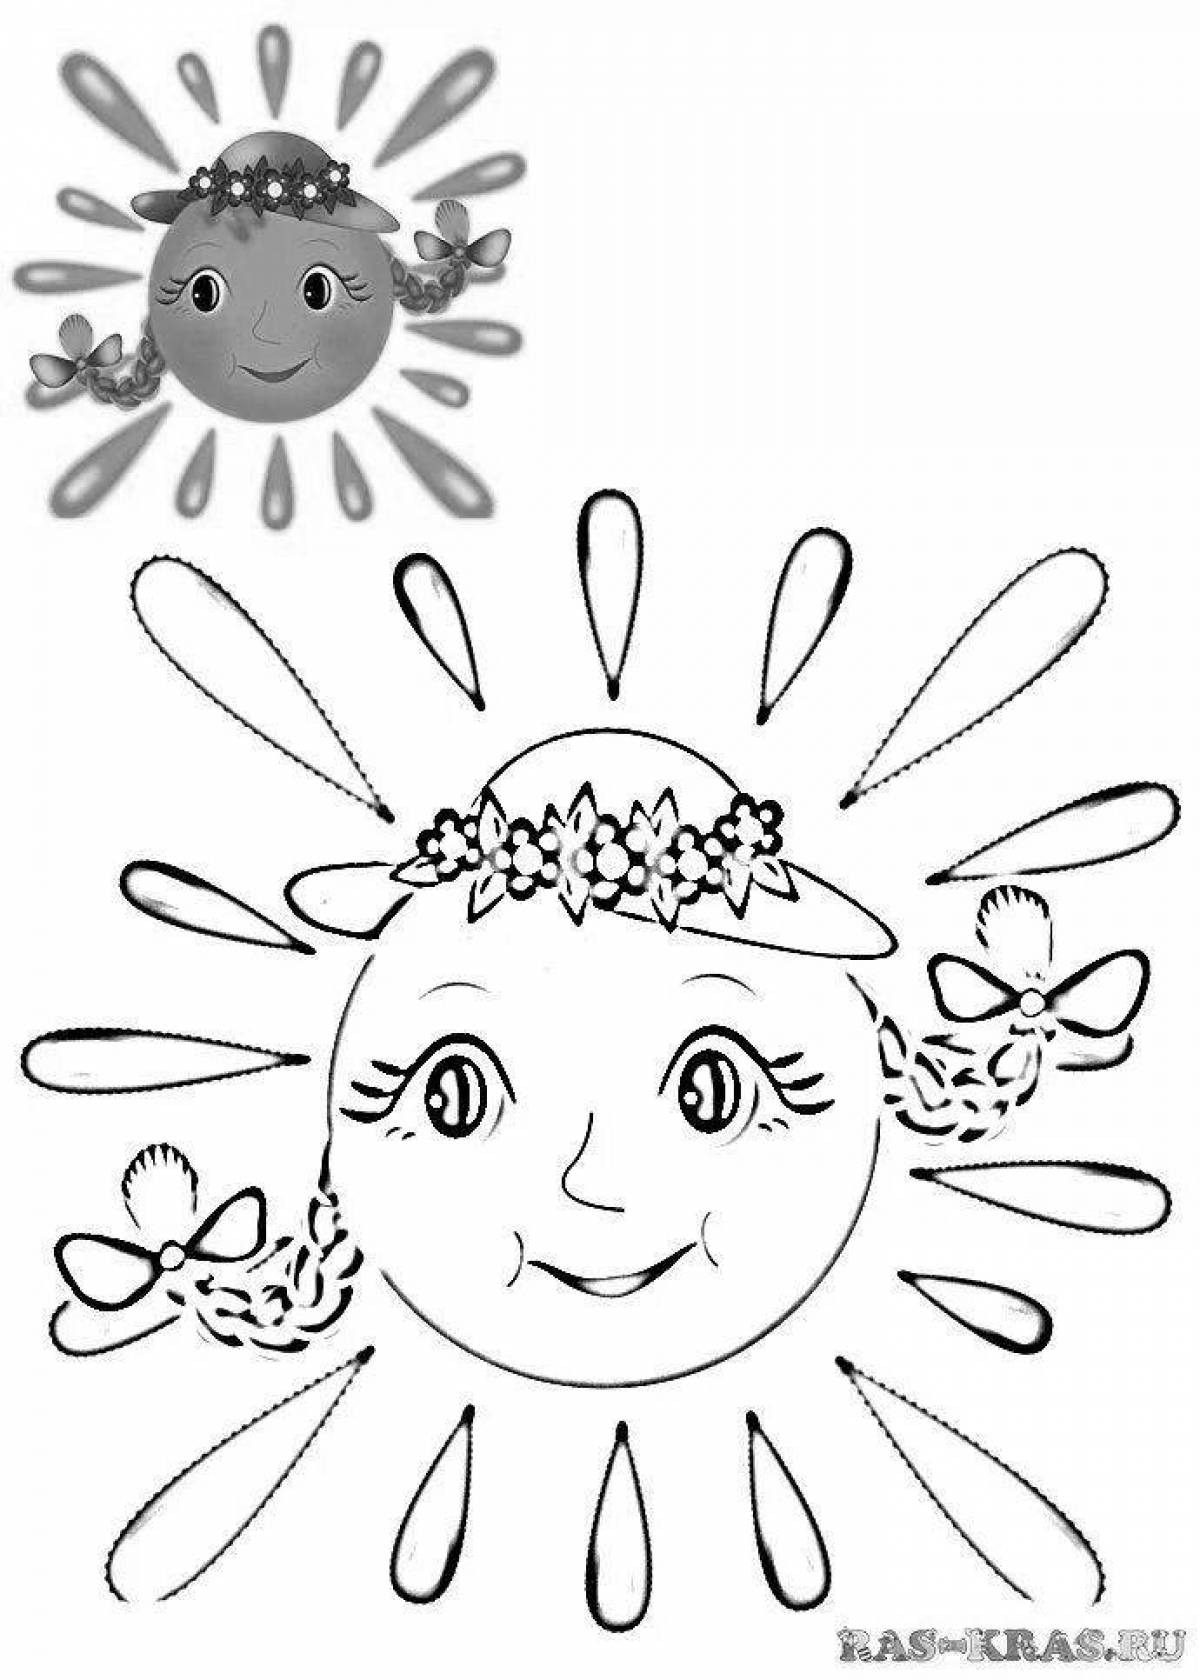 Adorable sun coloring book for kids